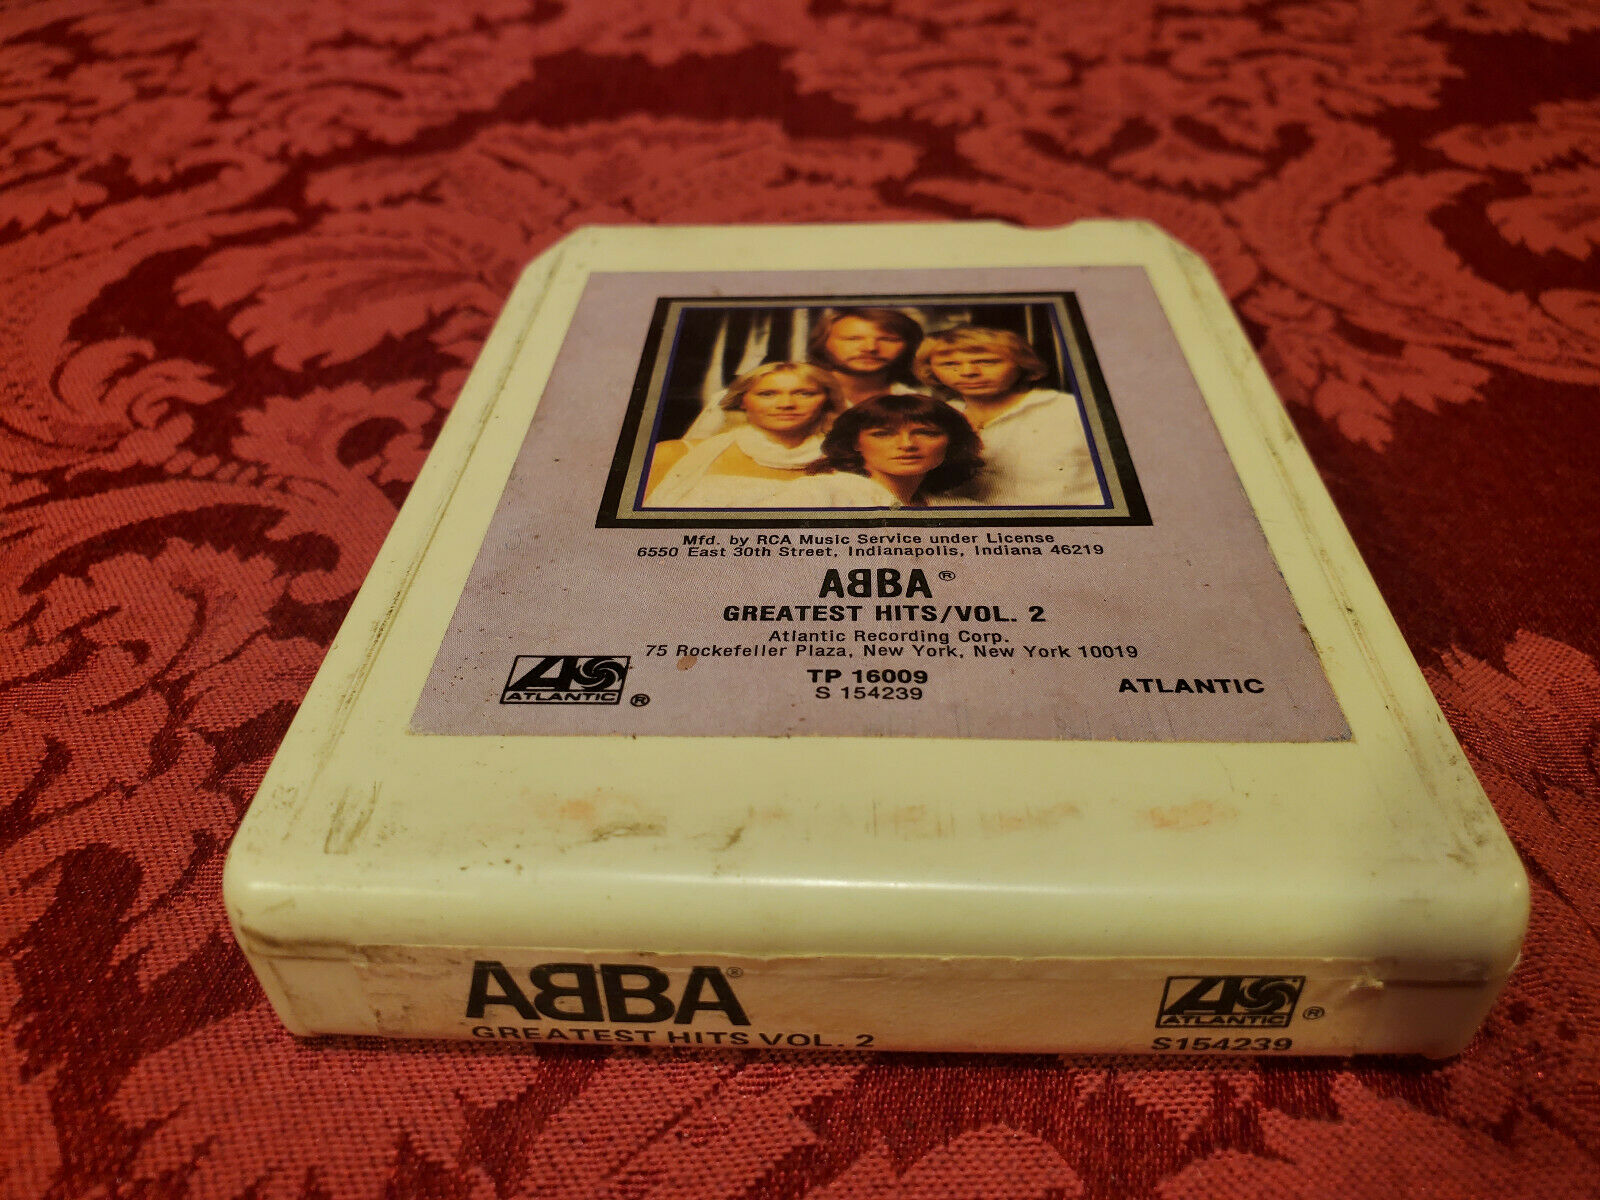 Abba, Greatest Hits Vol 2 – The 8-Track Tape Store